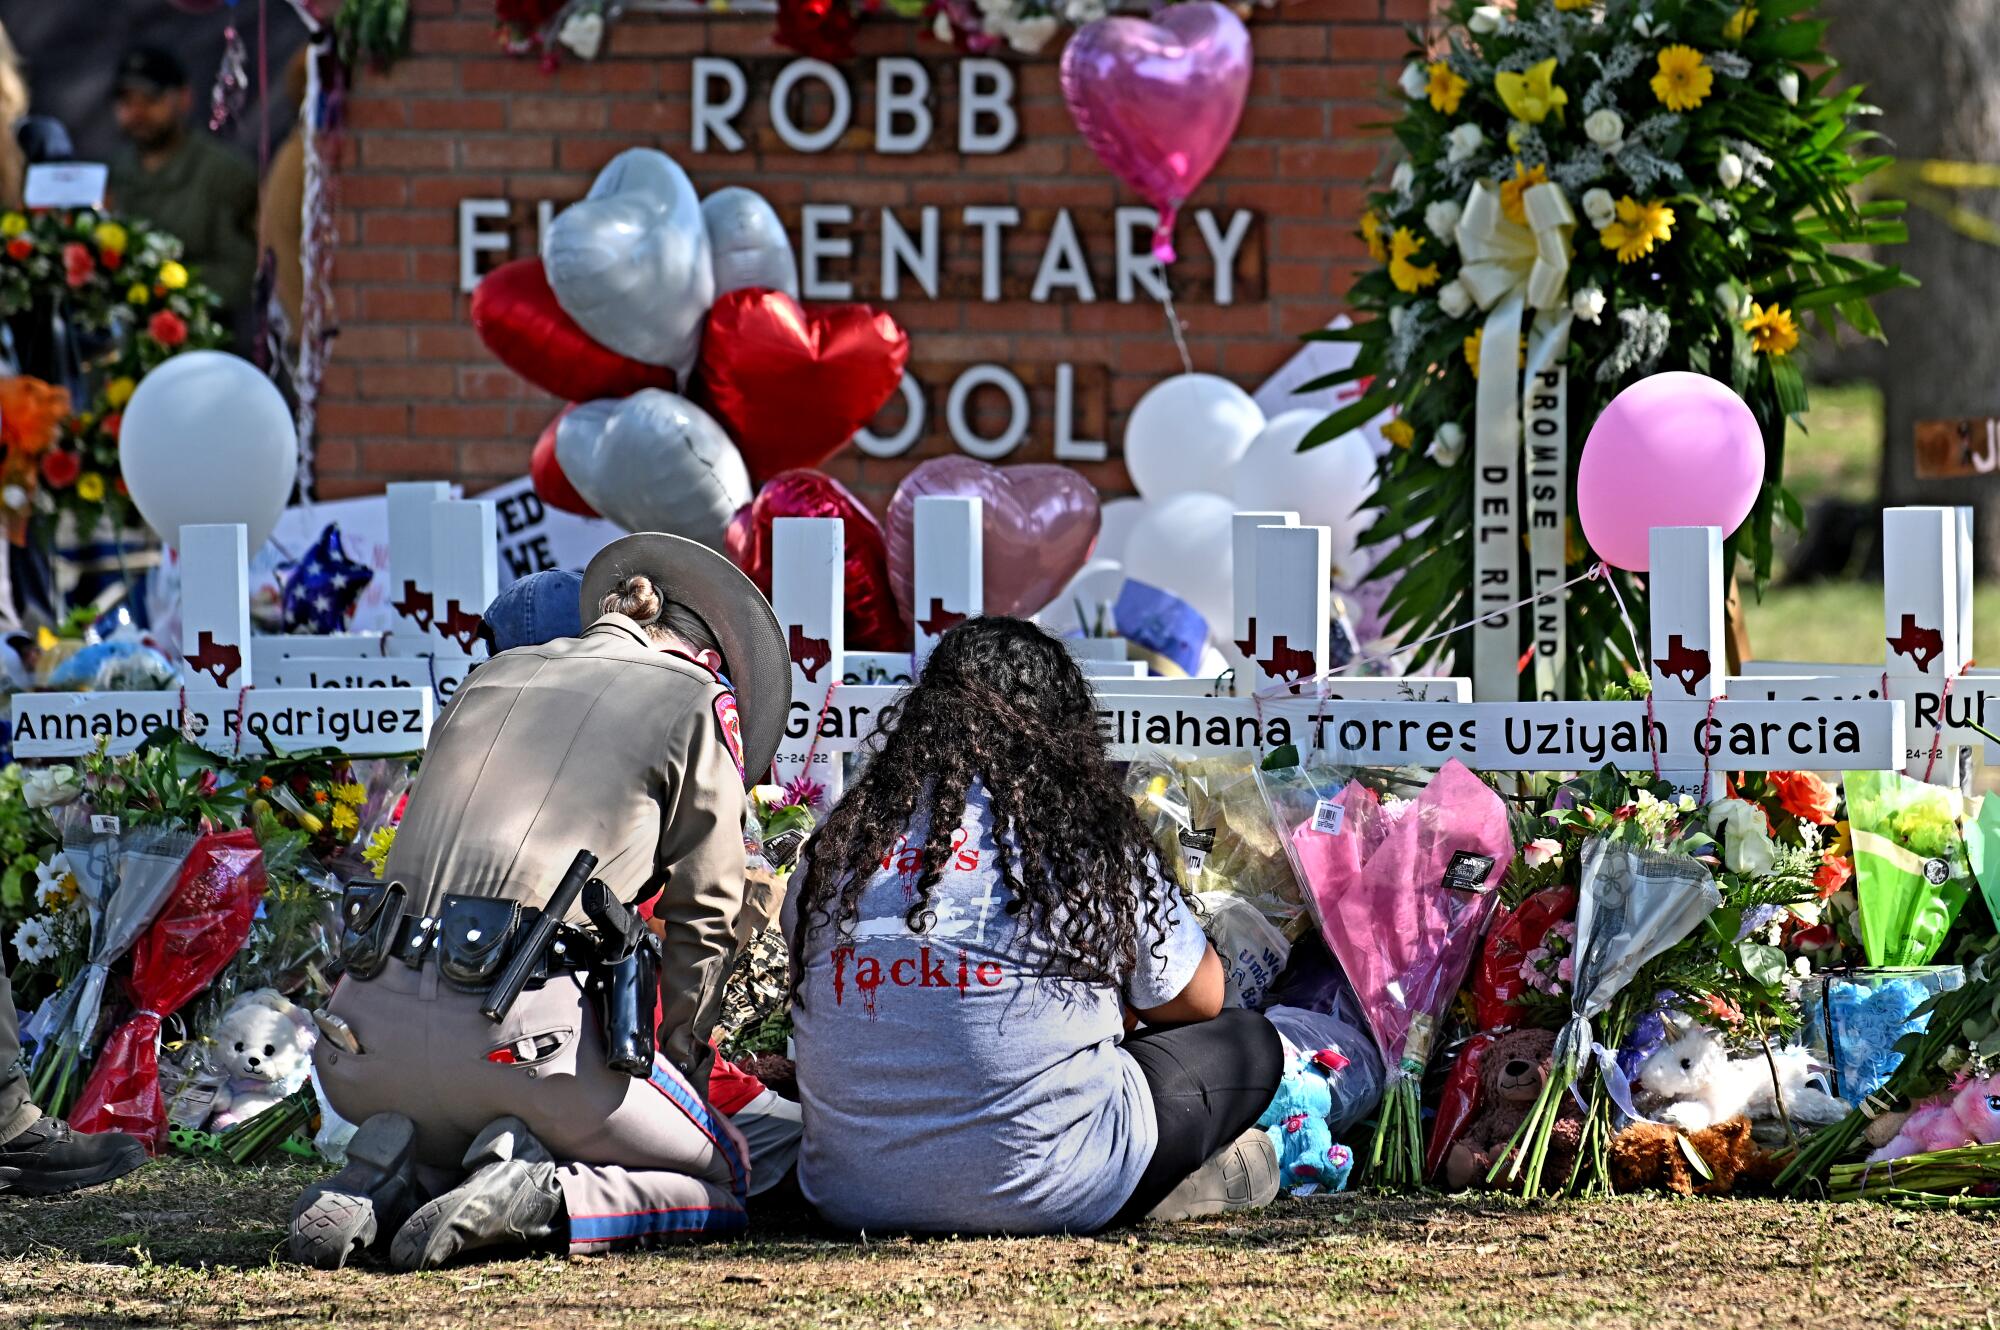 A police officer kneels with a woman at a memorial with flowers and balloons outside a school.